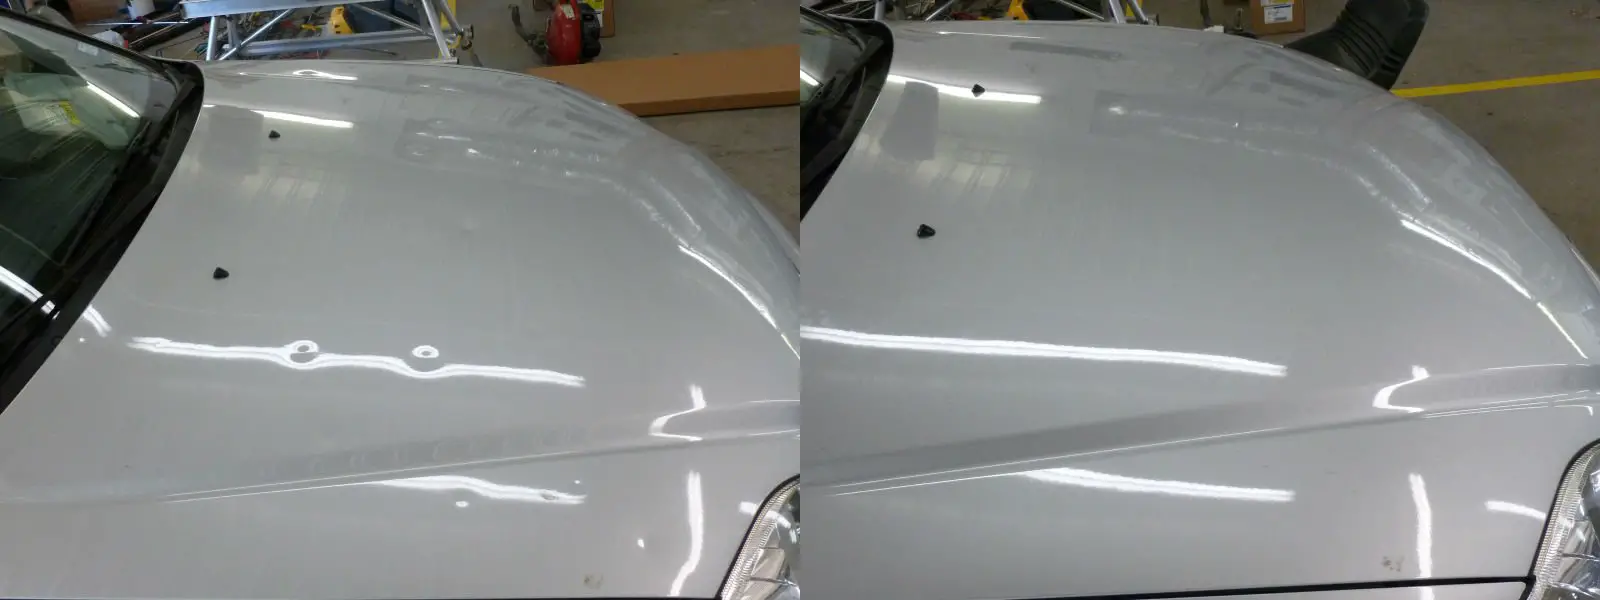 2000 Honda Civic with Hail Damage Before and After ...